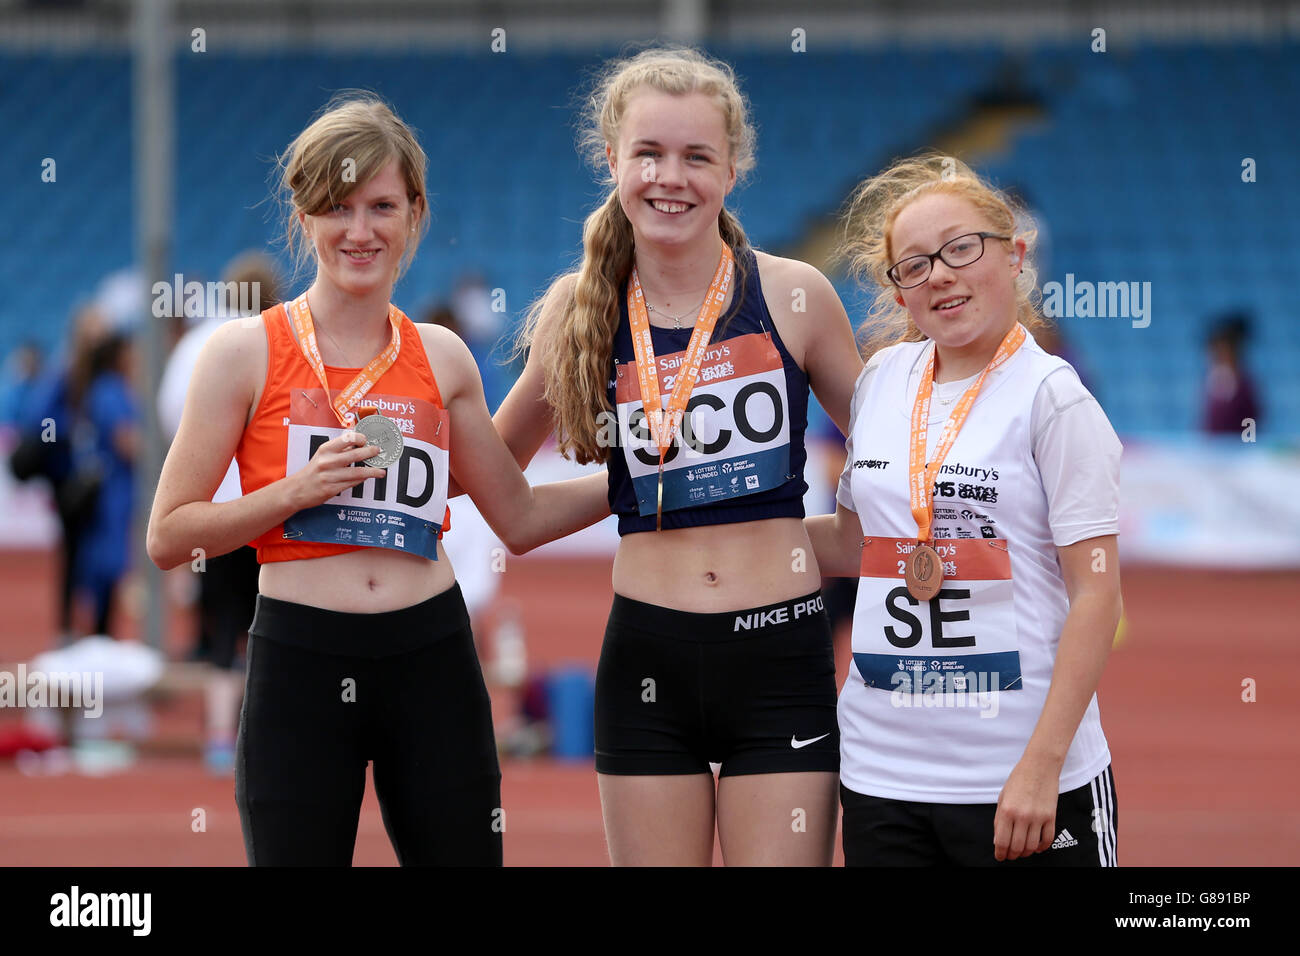 (l-r) England Midland's Sophie Hahn, Scotland's Maria Lyle and England South East's Maria Verdeille receive their girls ambulant 200m medals during the medal ceremony at the Sainsbury's 2015 School Games at the Manchester Regional Arena. Stock Photo